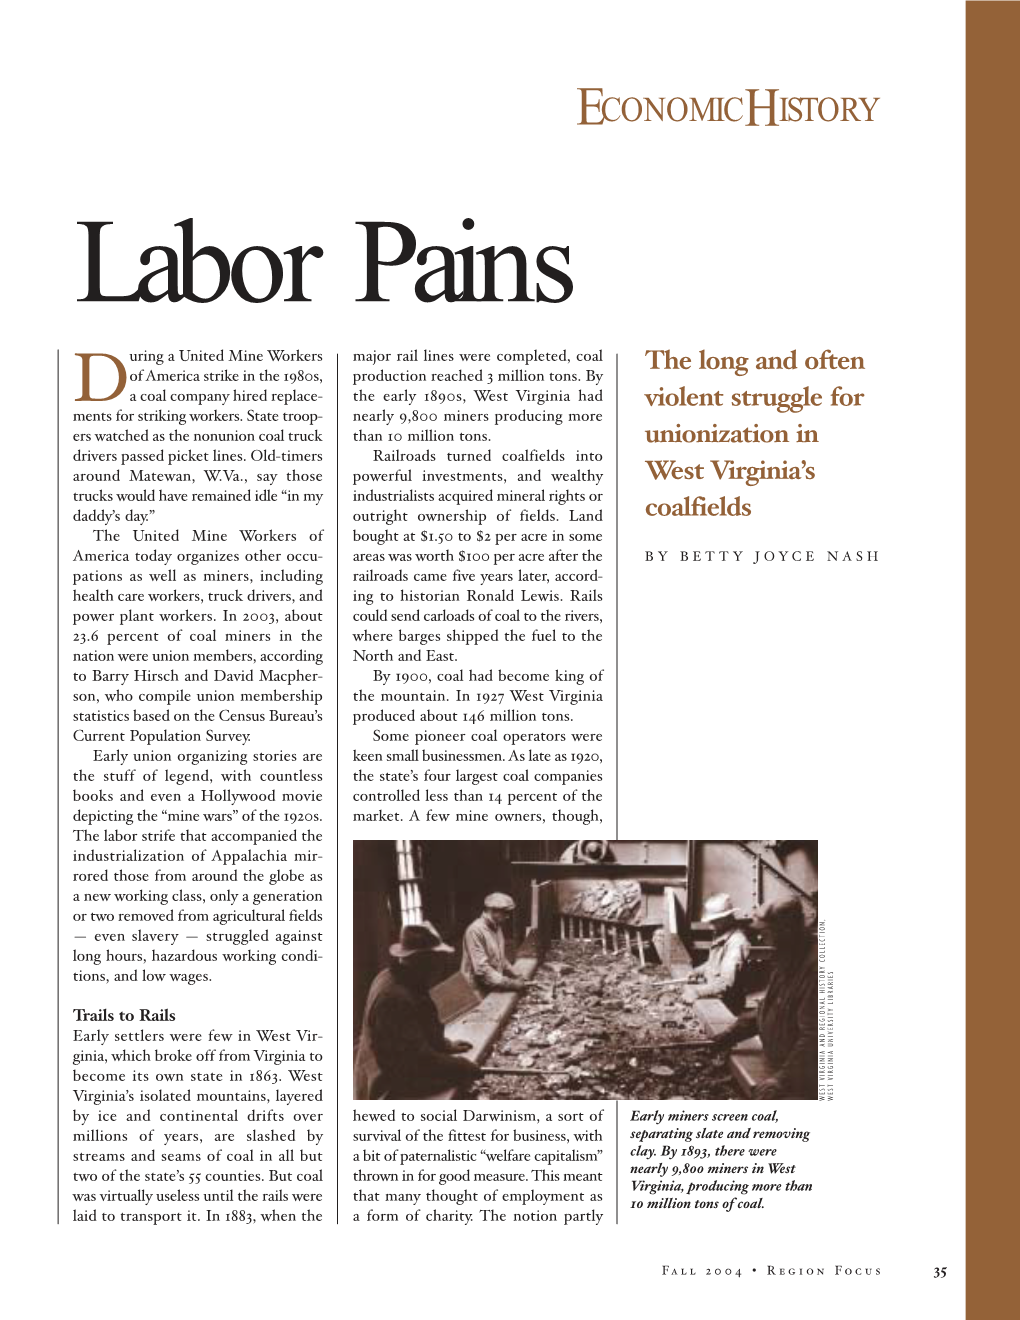 Labor Pains: the Long and Often Violent Struggle for Unionization In